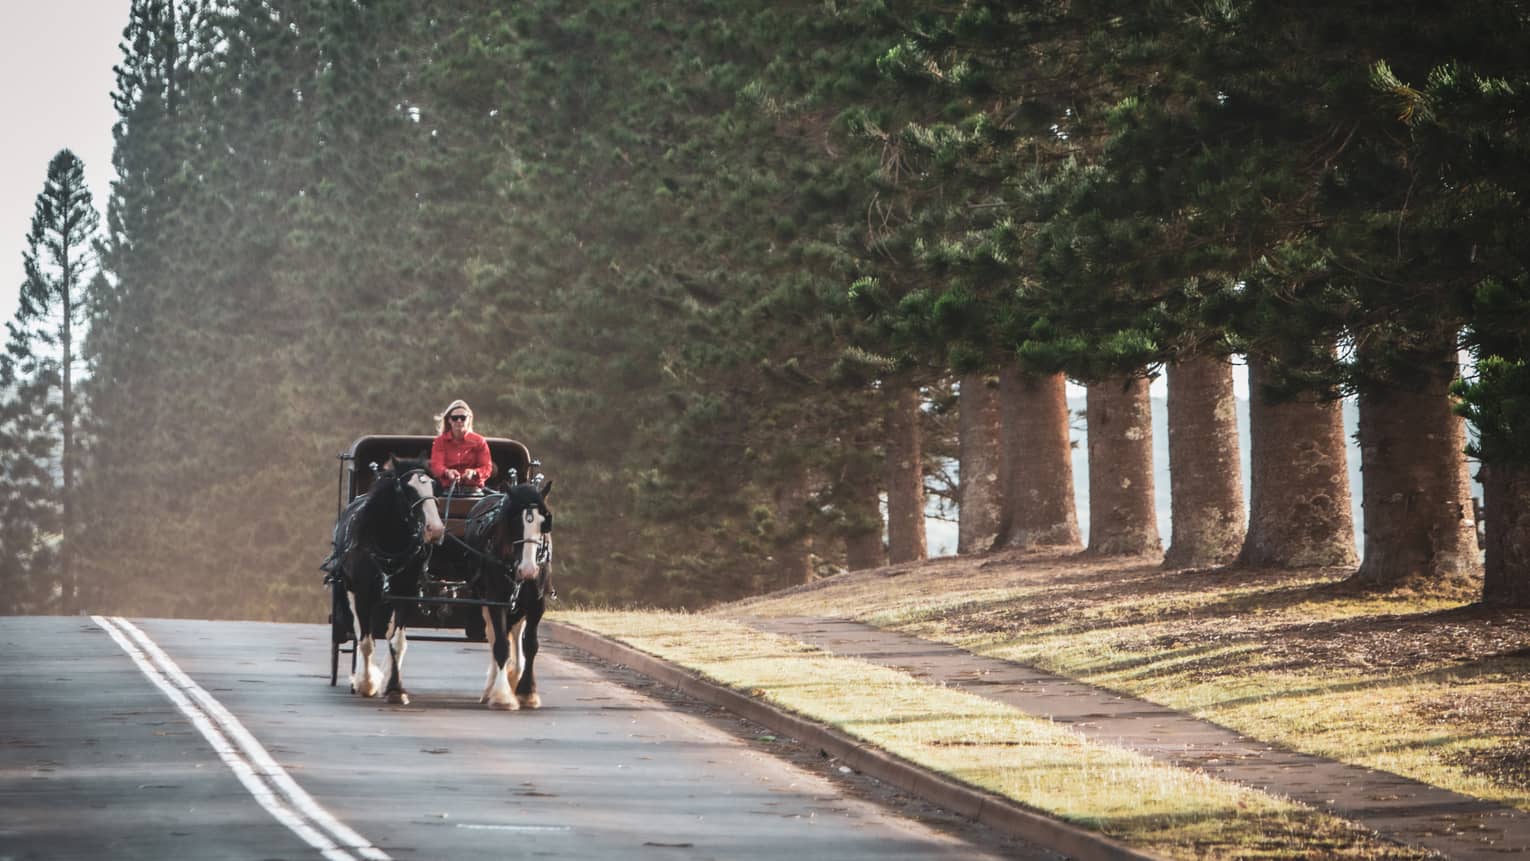 Two horses drawing a carriage on a paved road against a backdrop of tall evergreens, the driver in a bright red shirt.